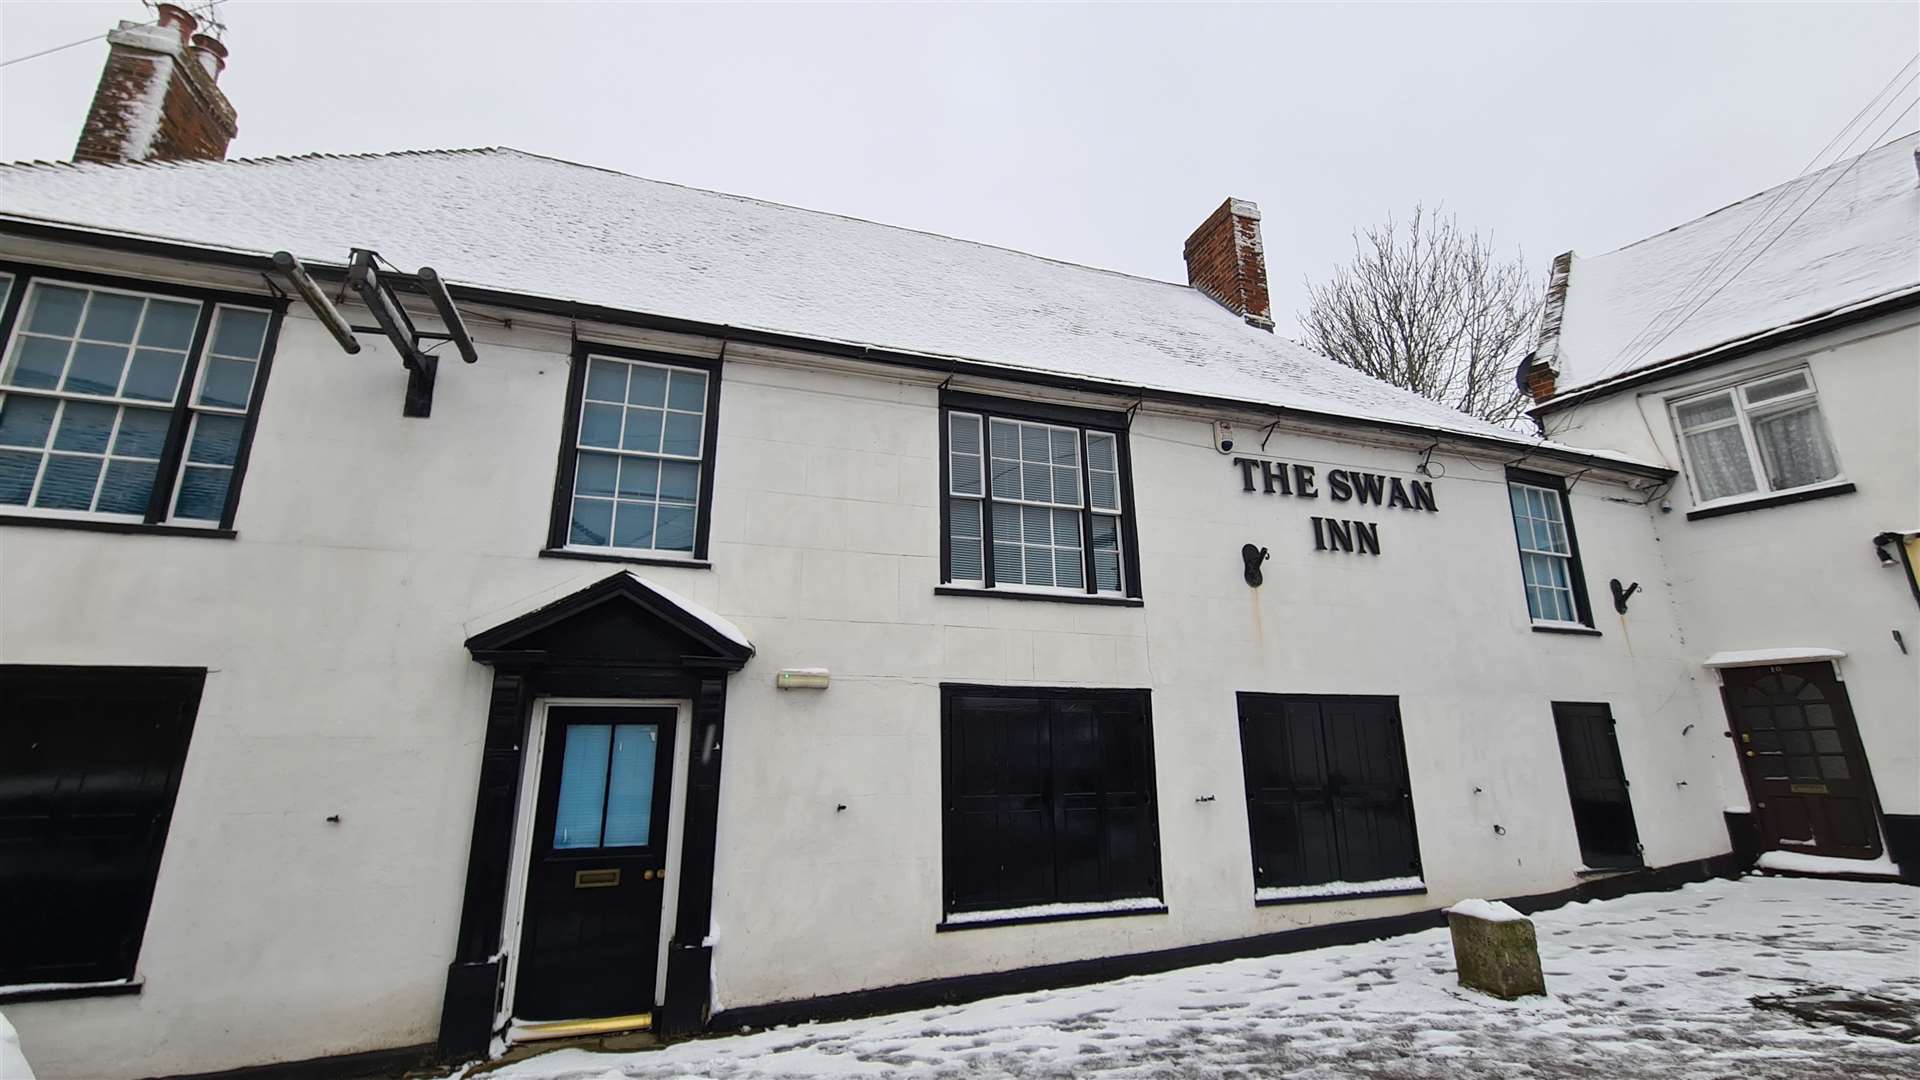 The boarded-up Swan Inn in Sturry